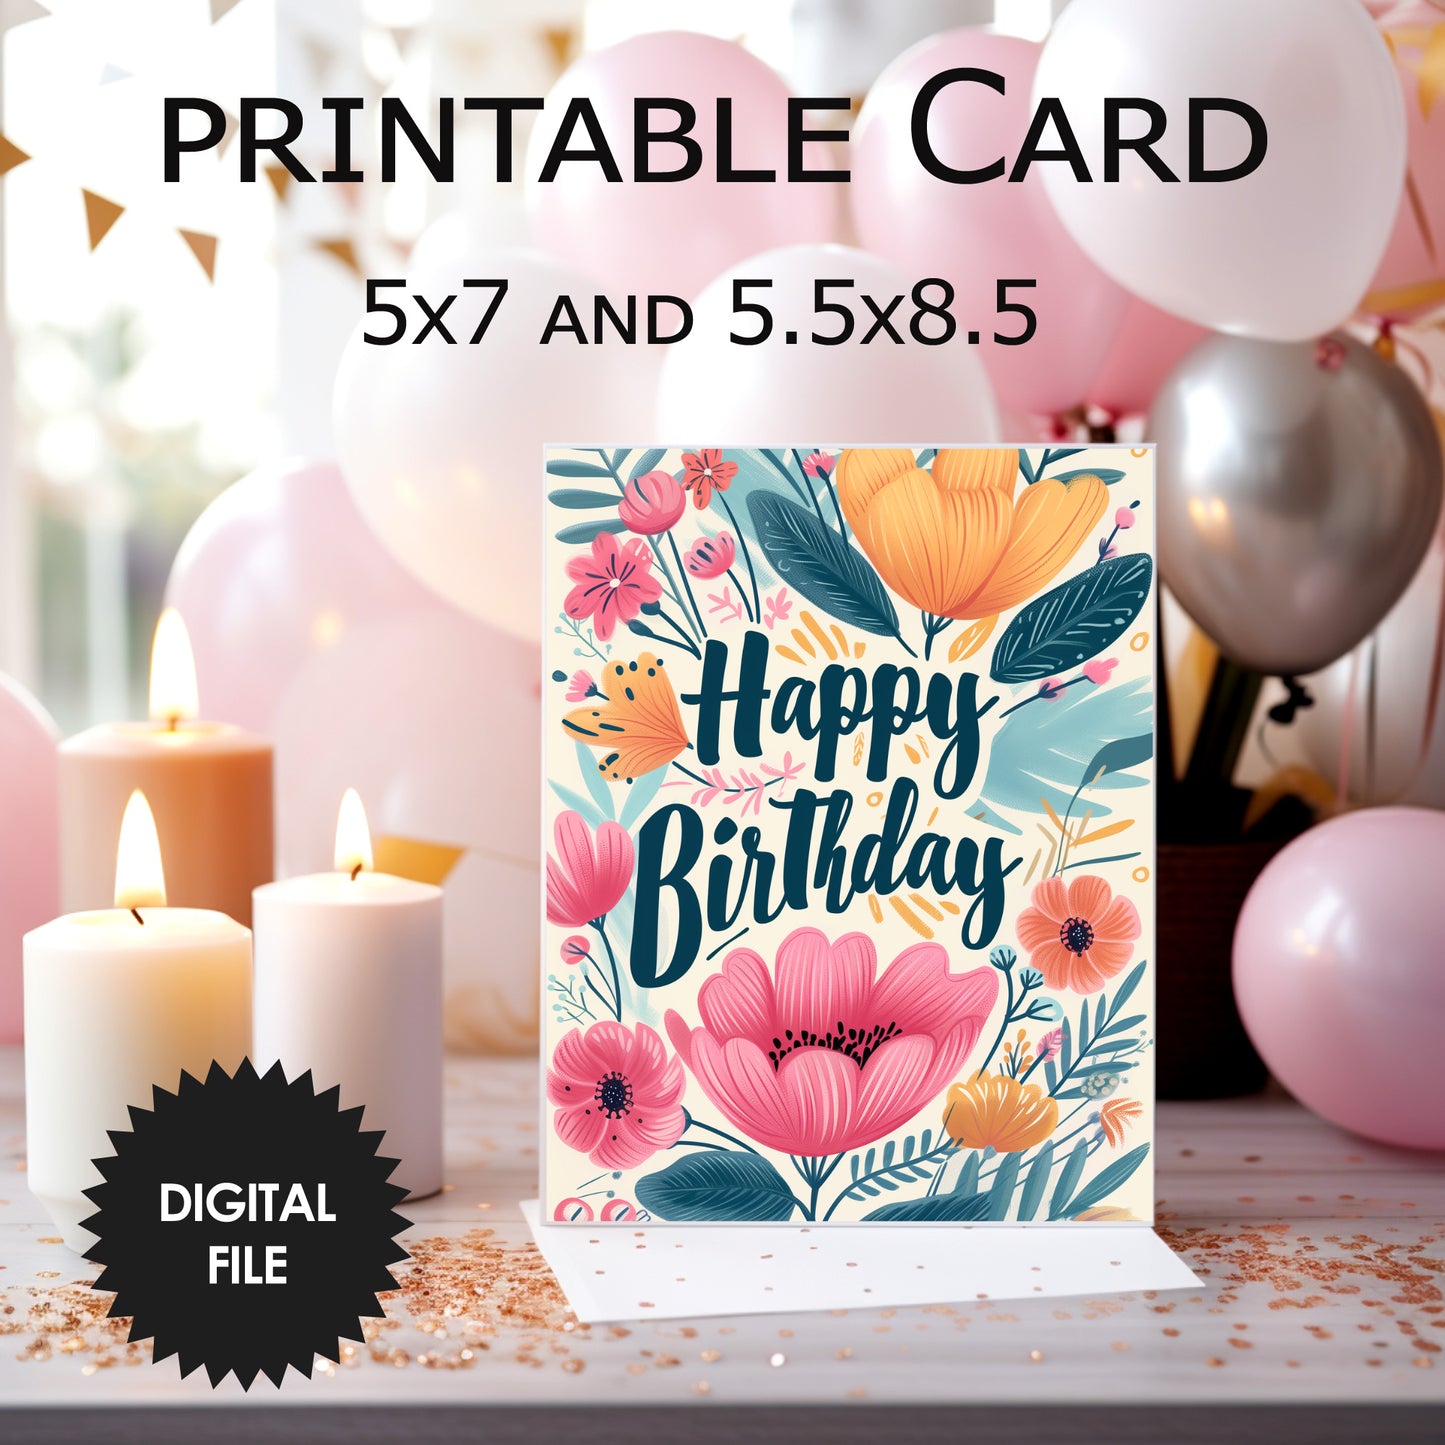 Printable Happy Birthday Card, Floral Design, Two Sizes 5"x7" and 5.5"x8.5"